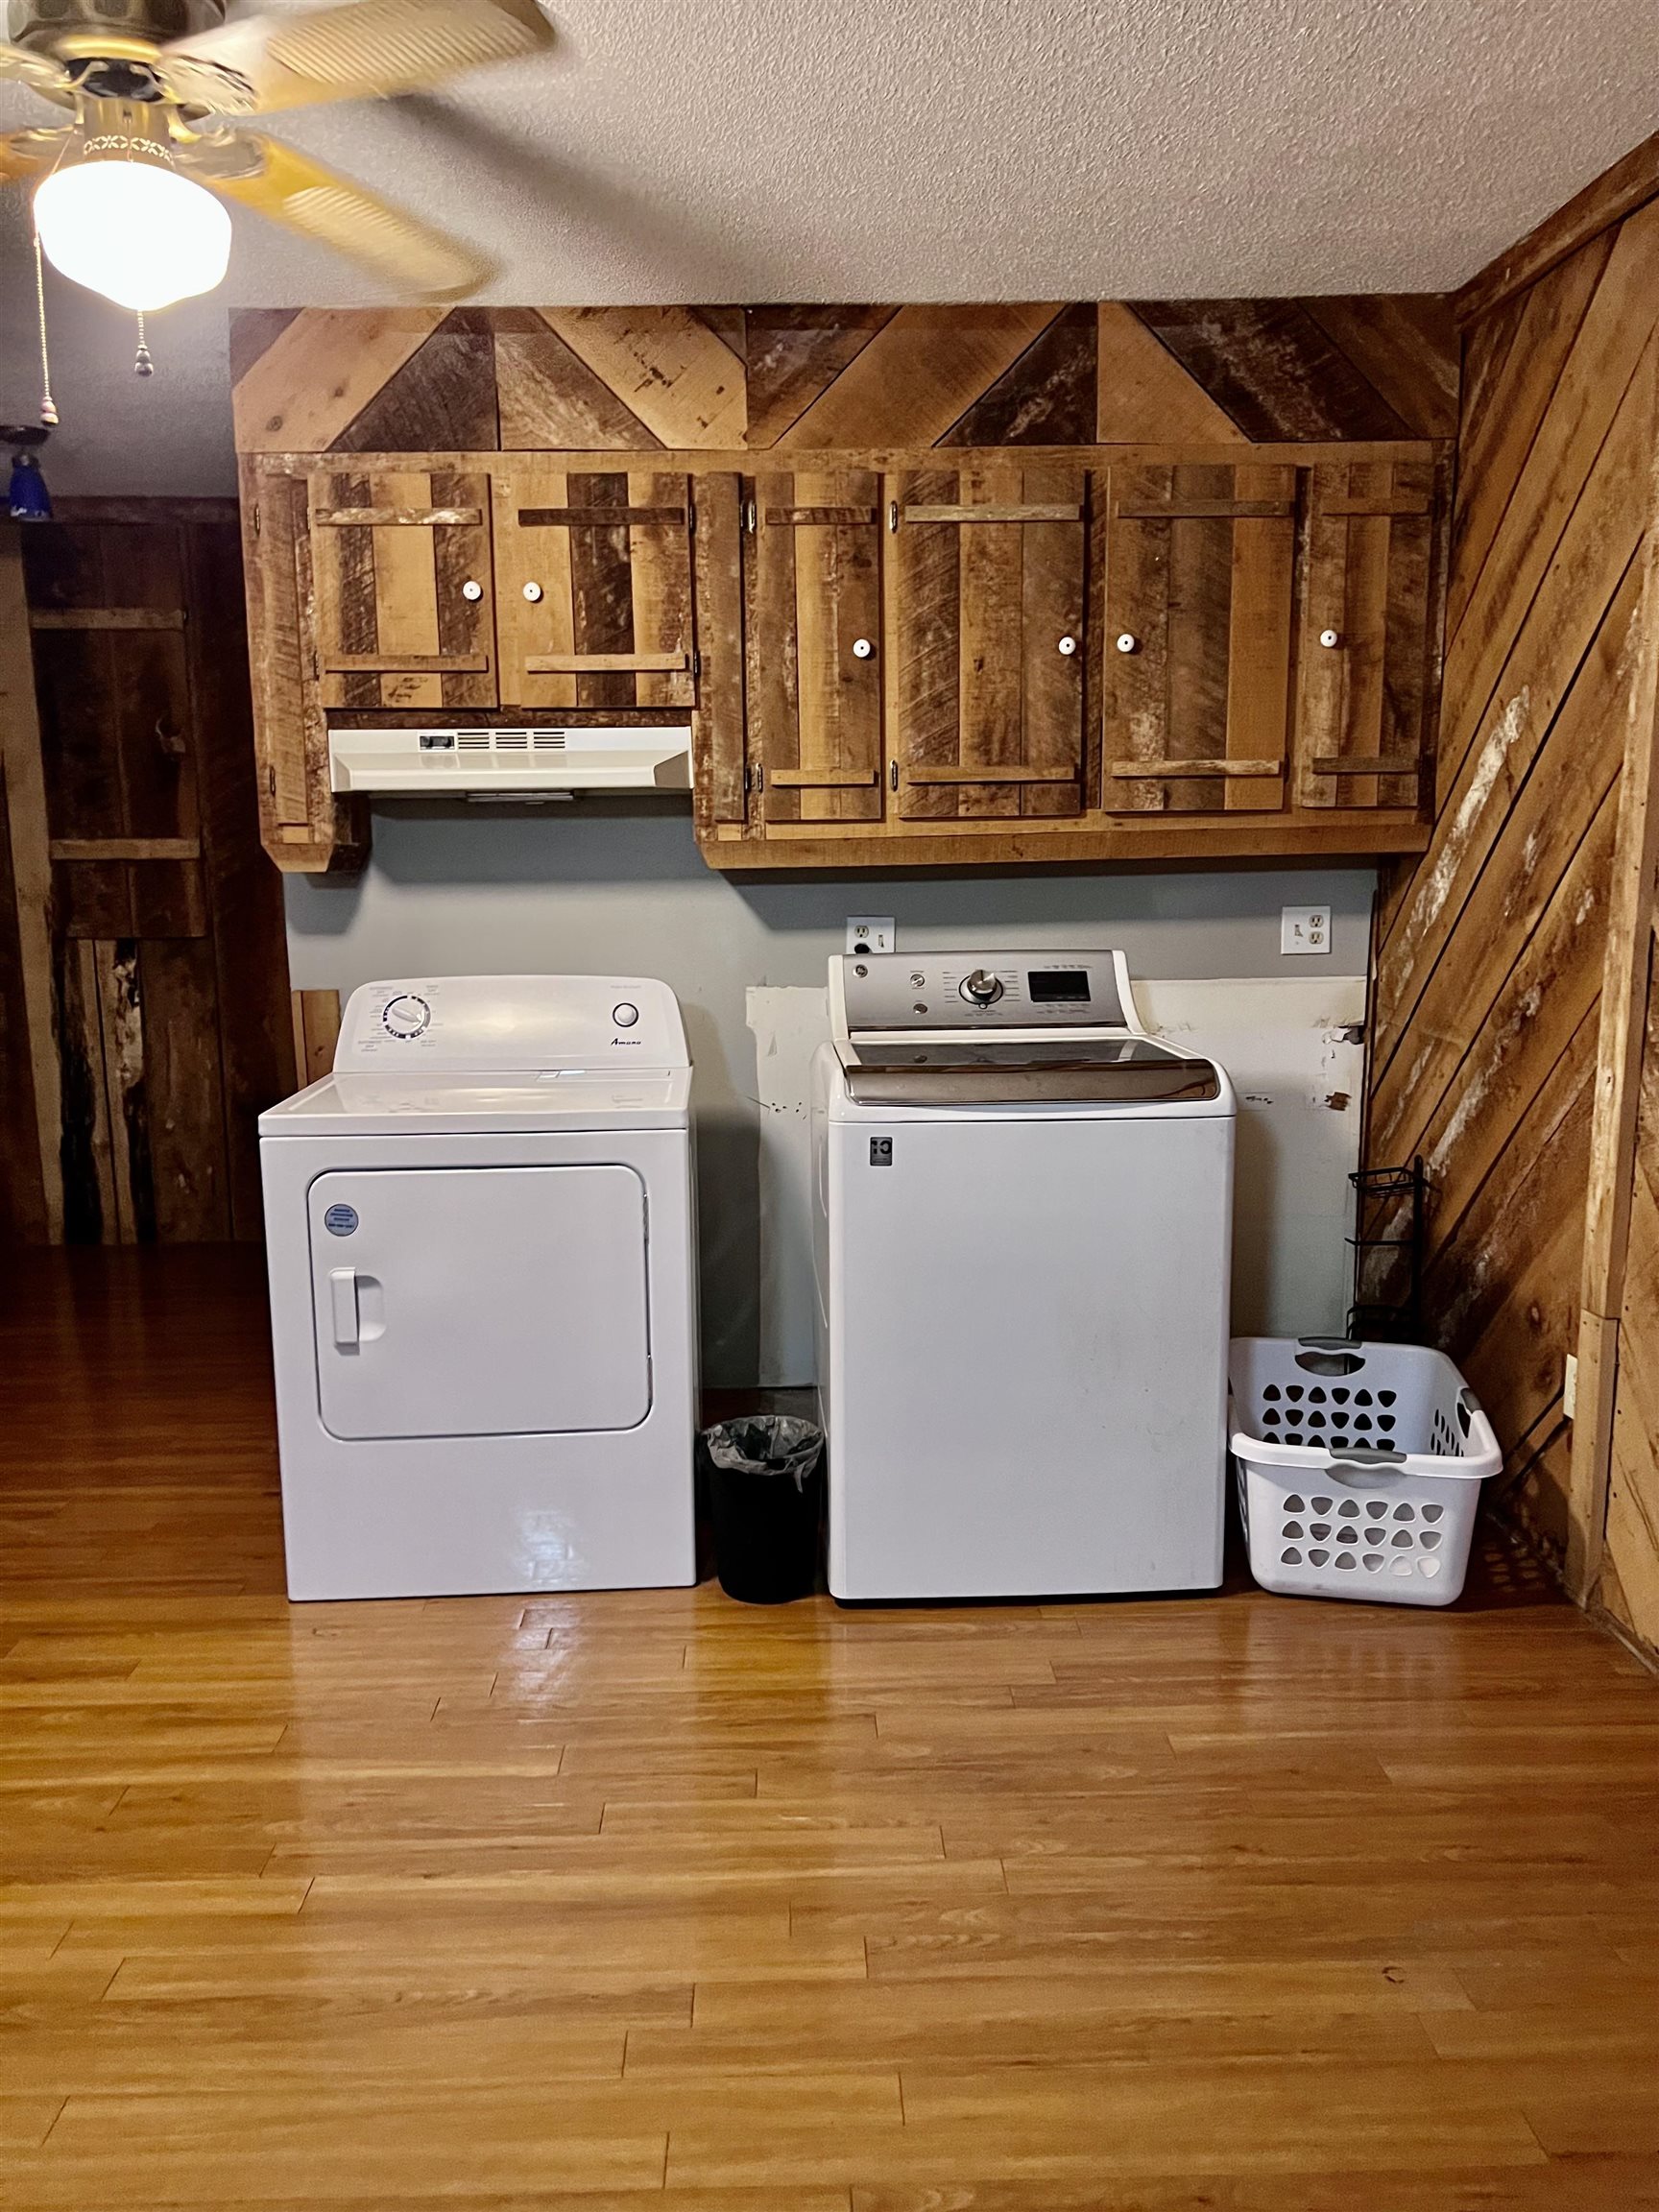 Washer and Dryer was moved downstairs. There is a Laundry room upstairs connected with the Pantry